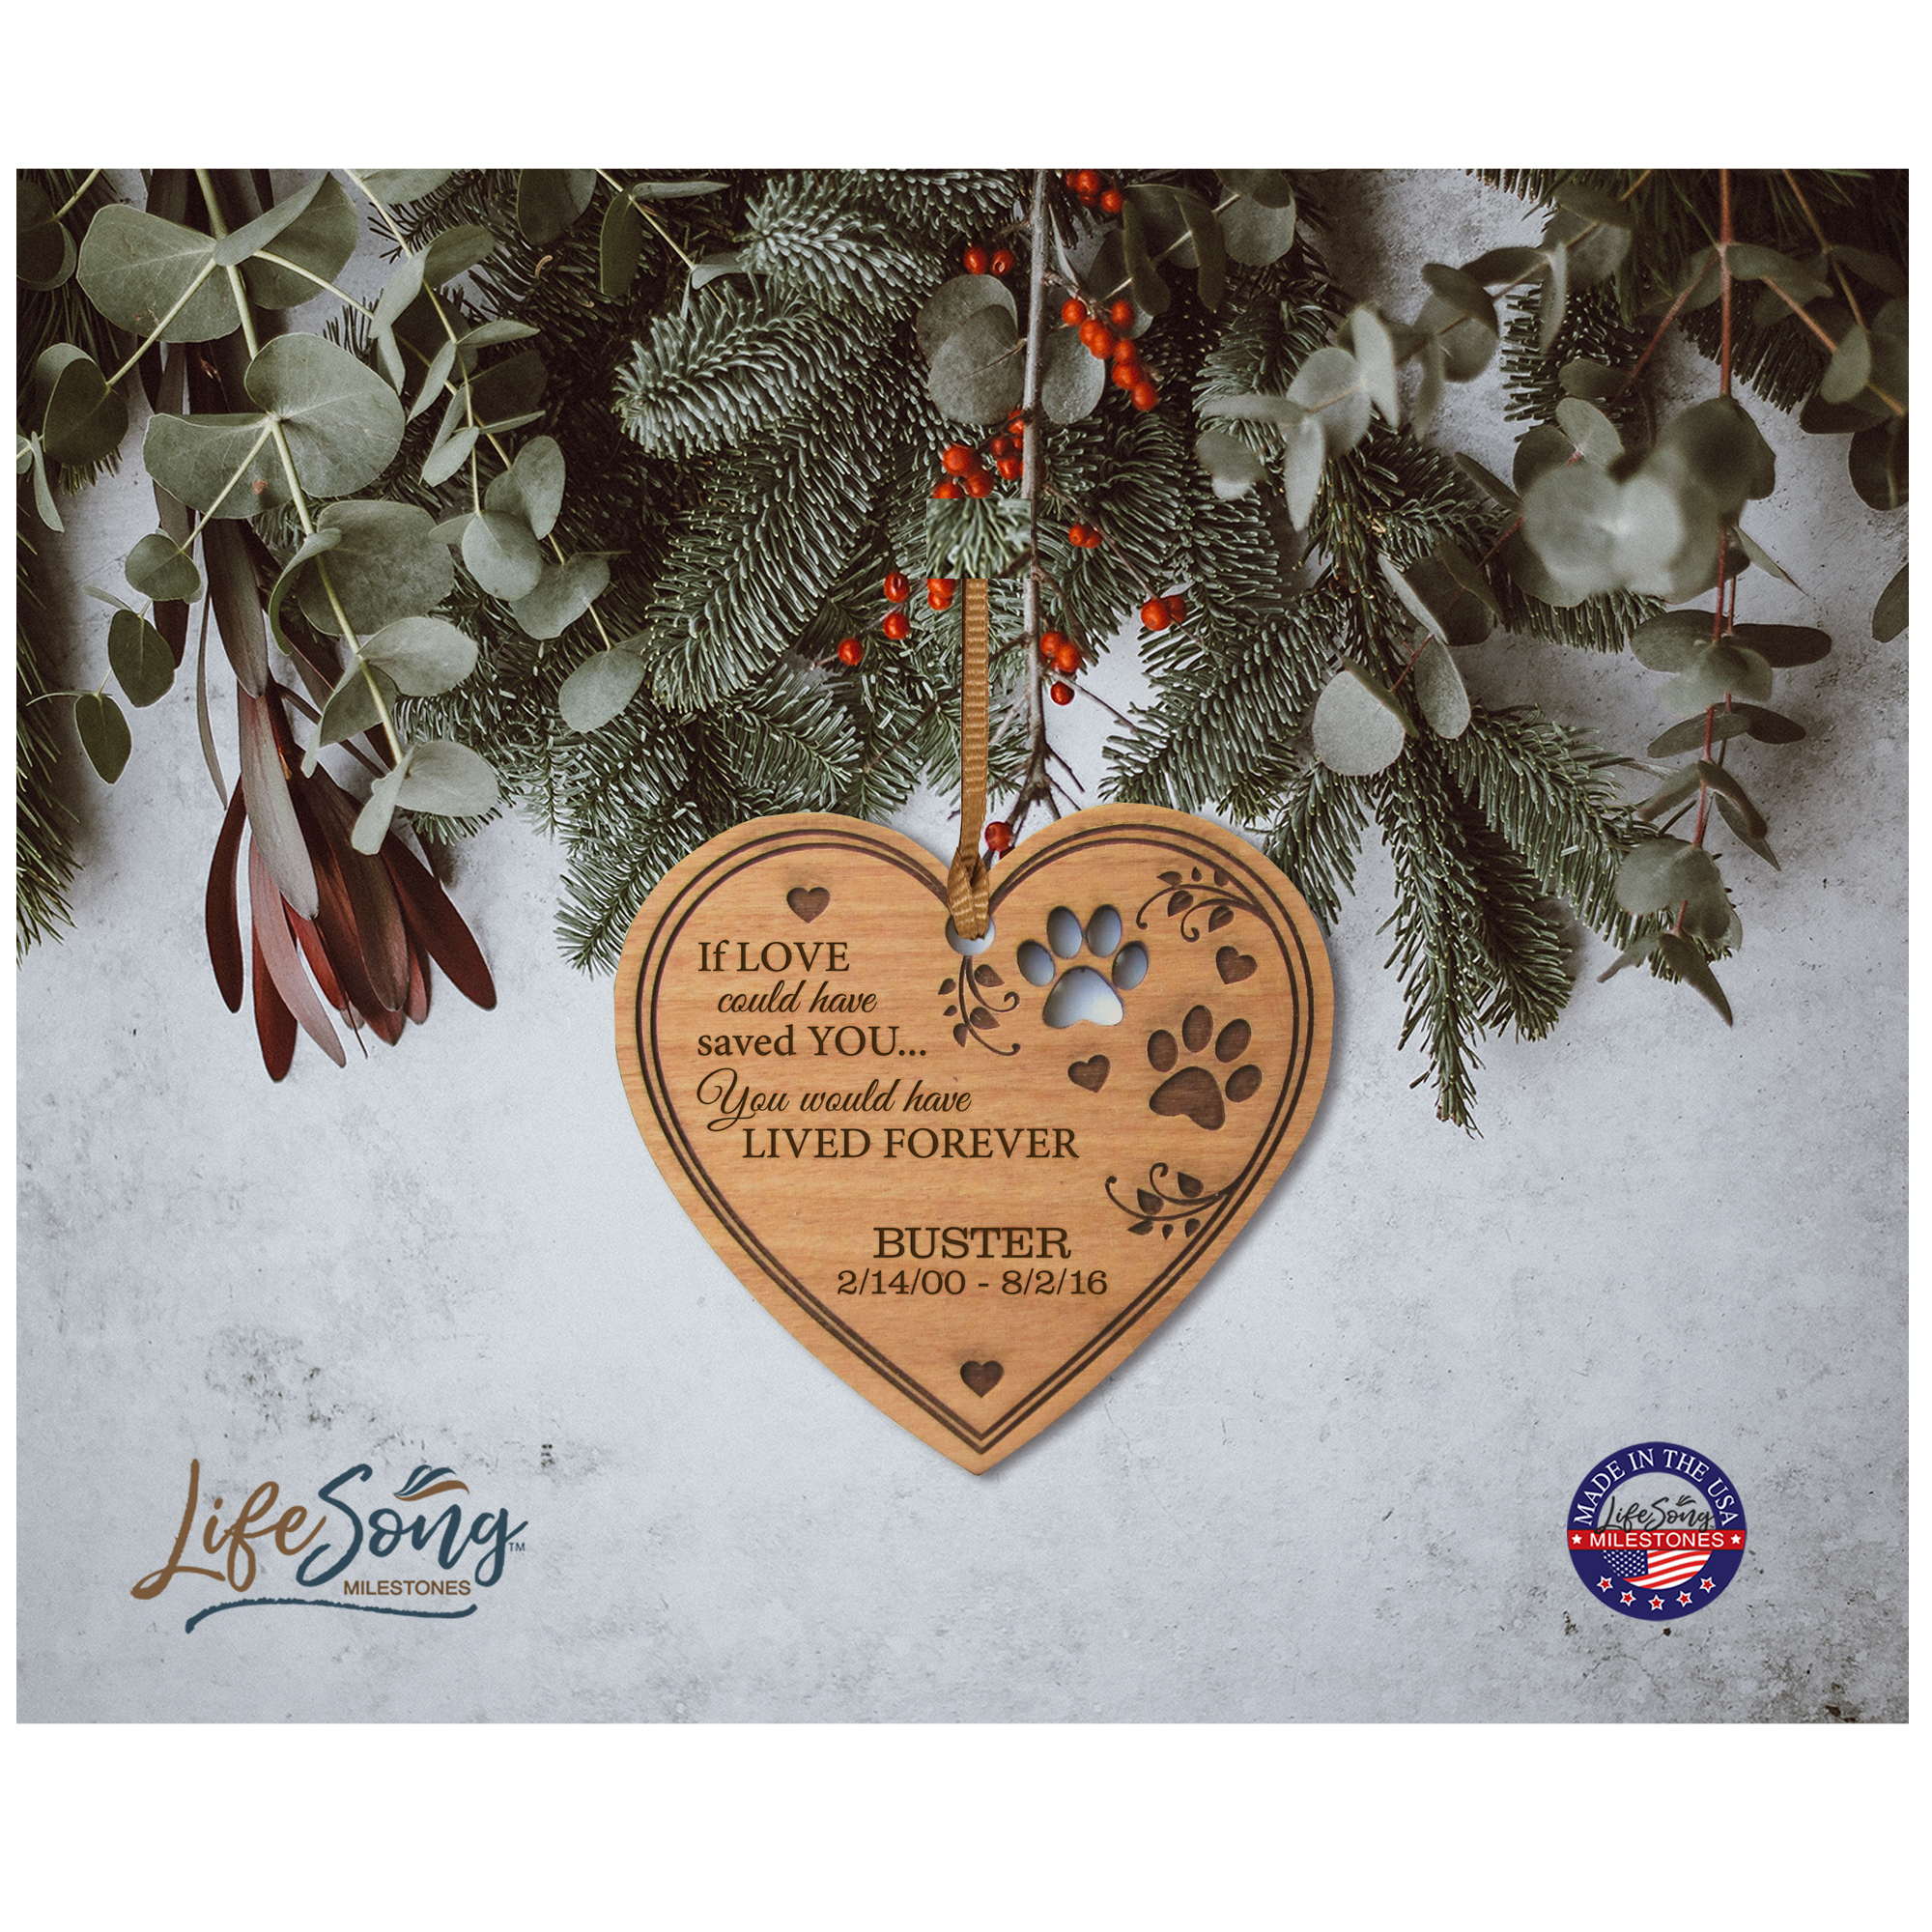 Pet Memorial Wooden Heart Ornament - If Love Could Have Saved You